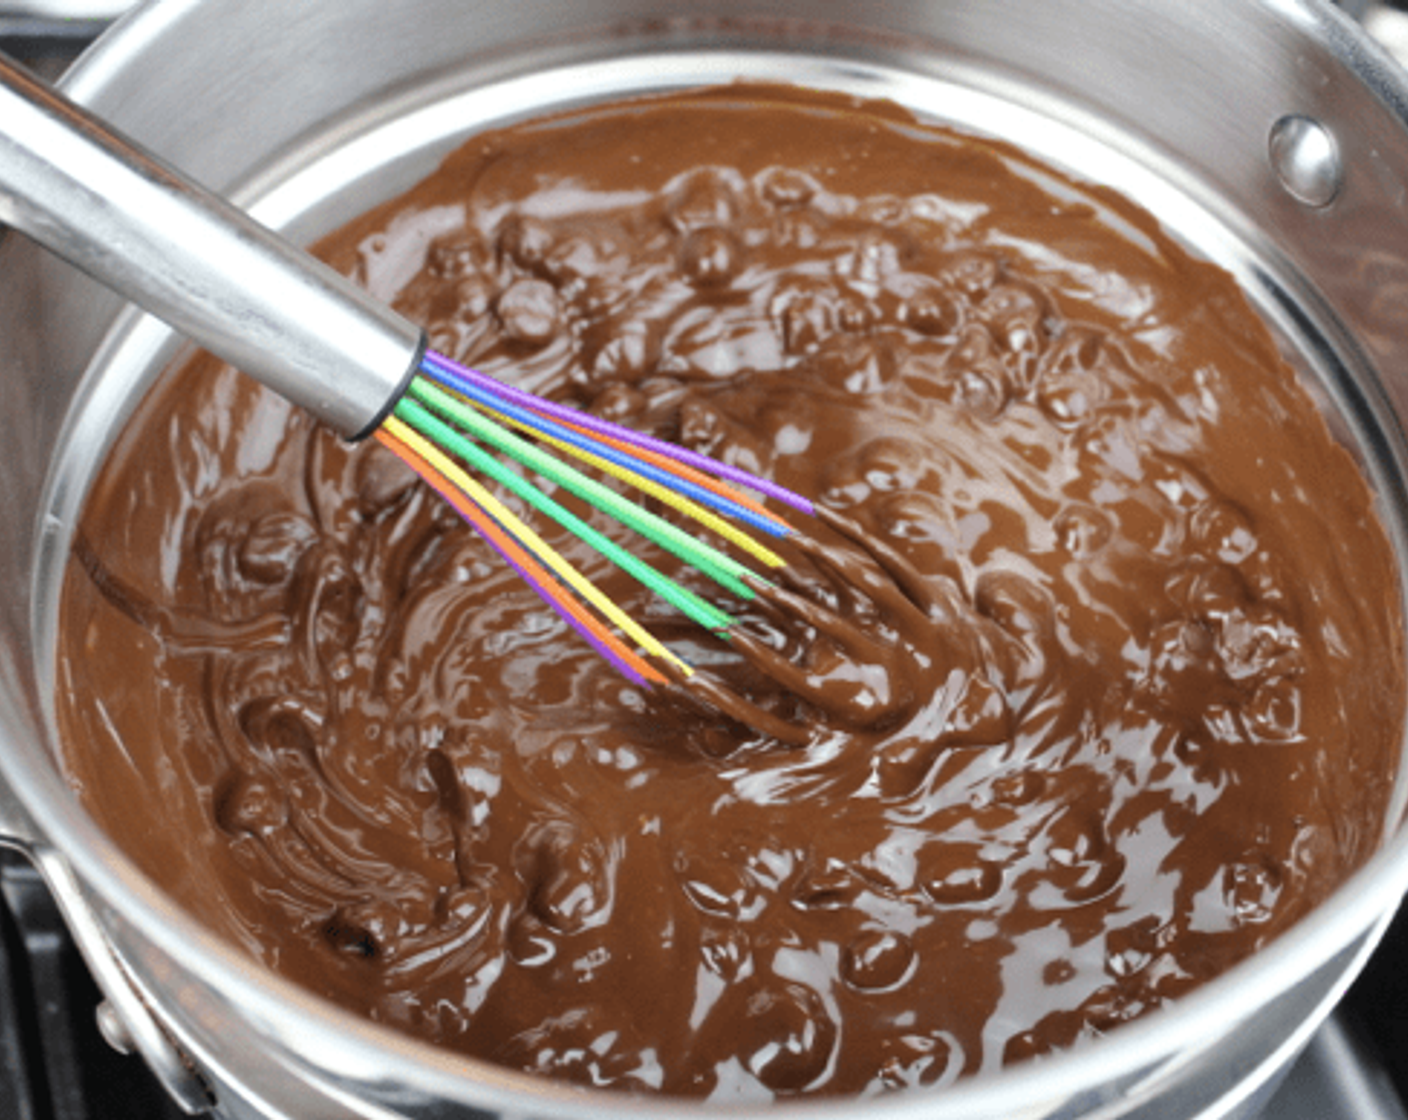 step 2 Occasionally stir the chocolate with a whisk to help in melting the chocolate. Once the chocolate is completely melted, remove the upper pan from the double boiler and set it on your counter.